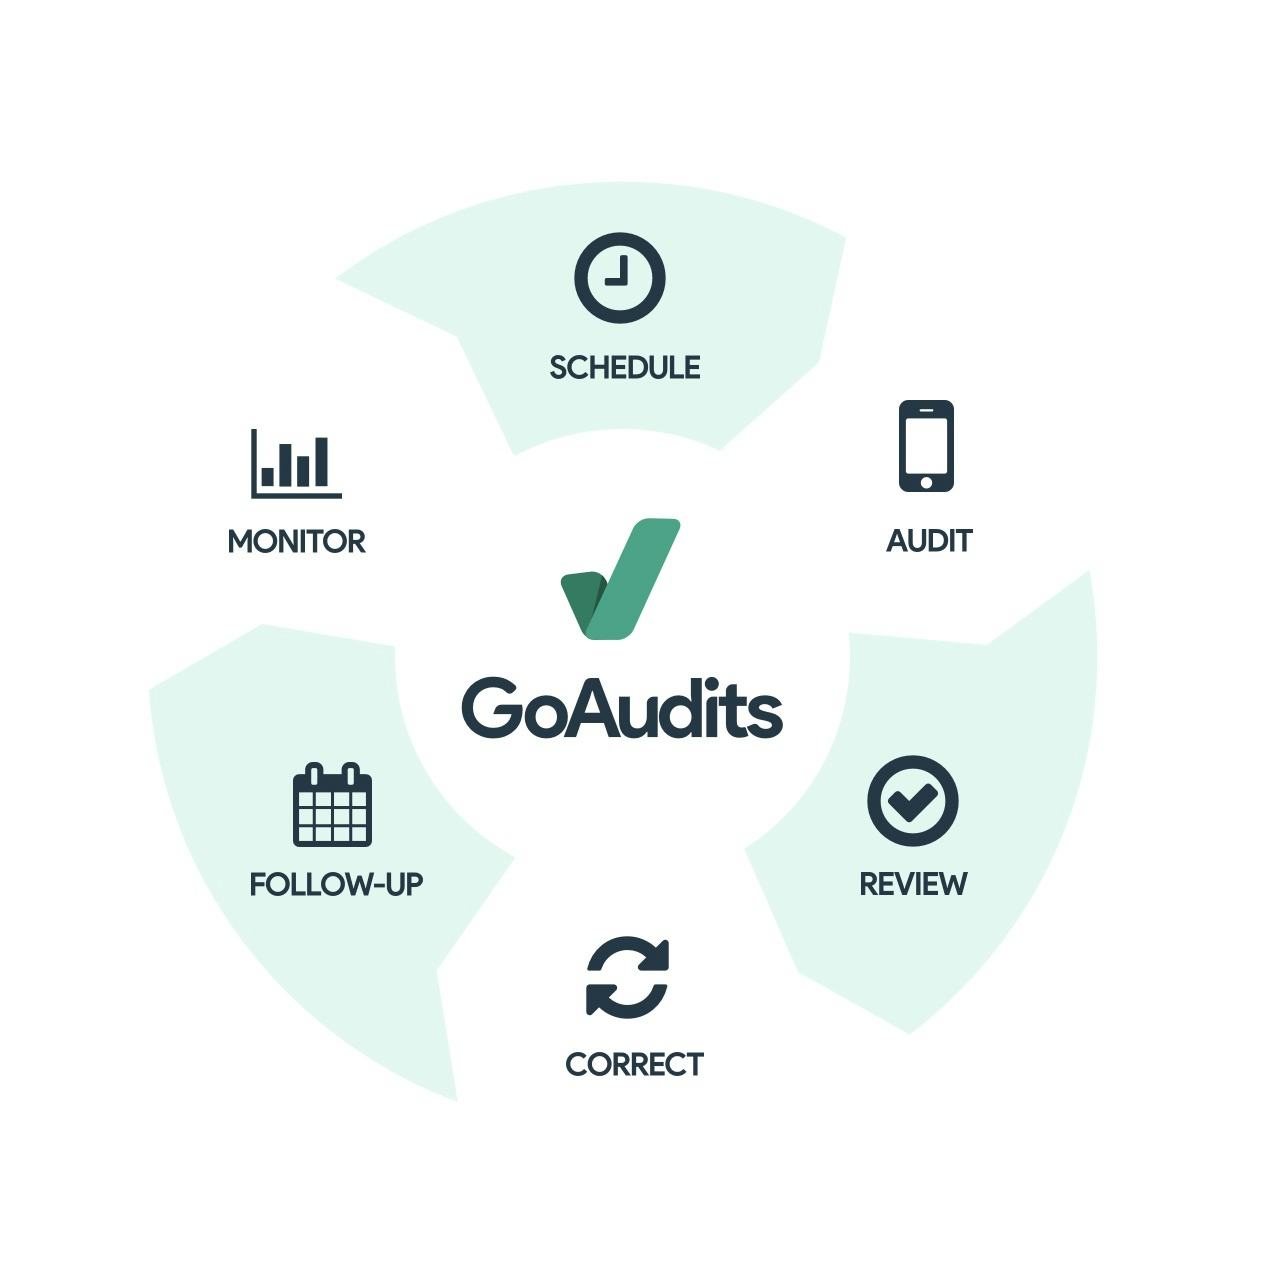 GoAudits Software - Full auditing cycle, from scheduling to corrective action follow-up and performance monitoring